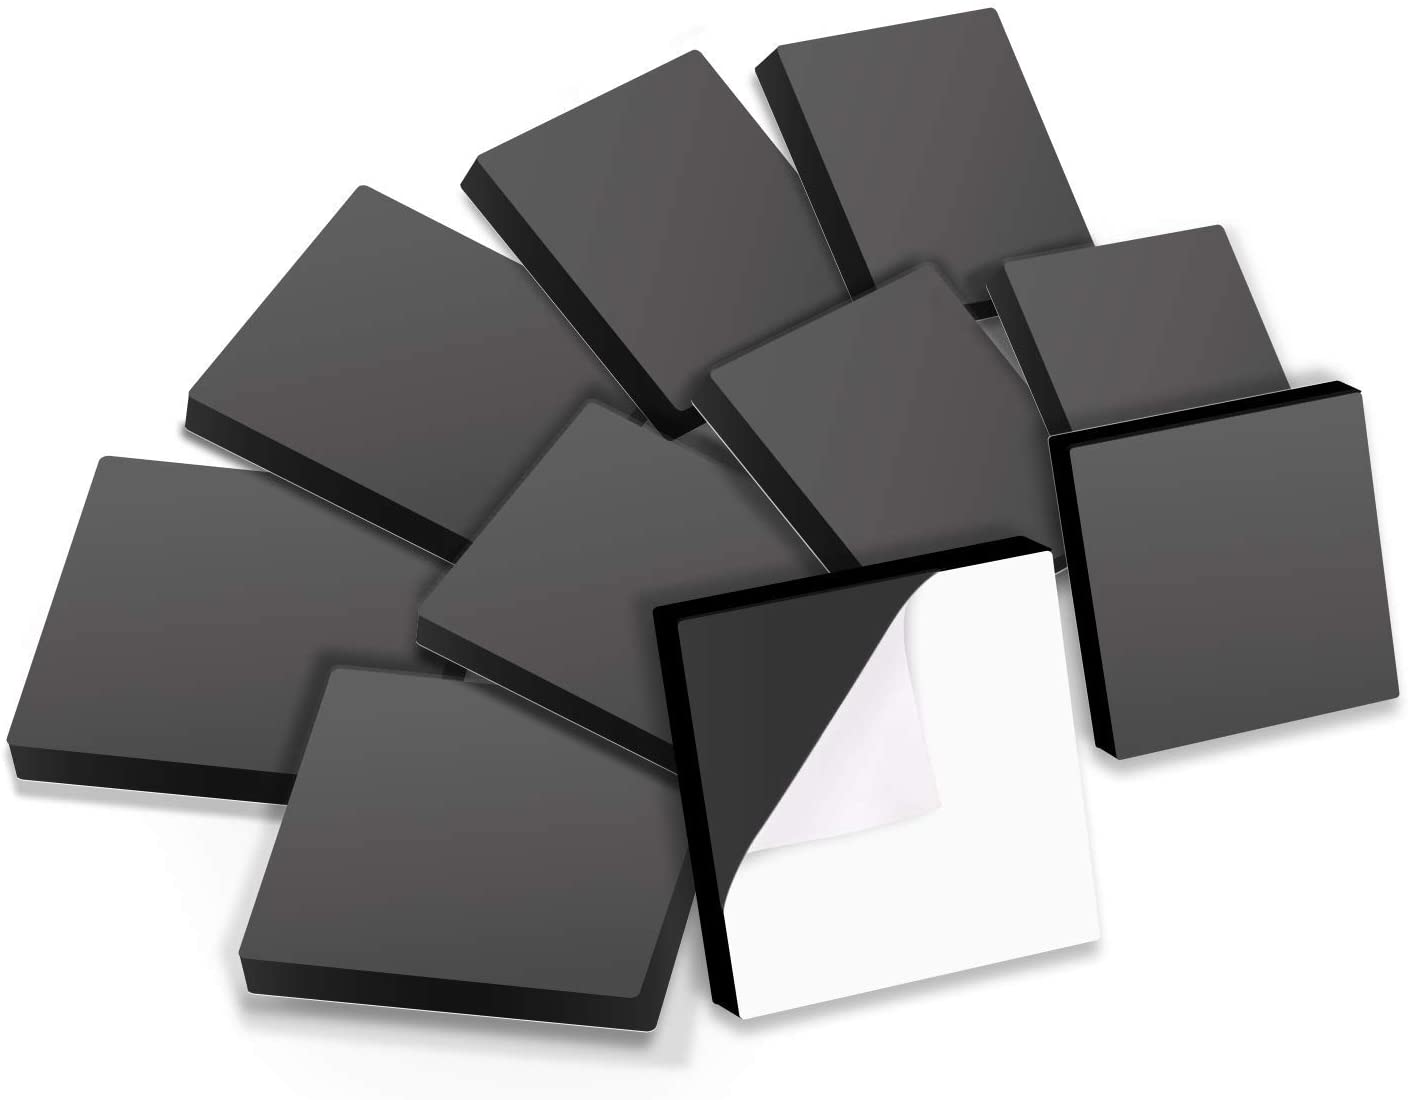 1 x 1 Self Adhesive Magnets - Pack of 50 - Small Squares - 20mil